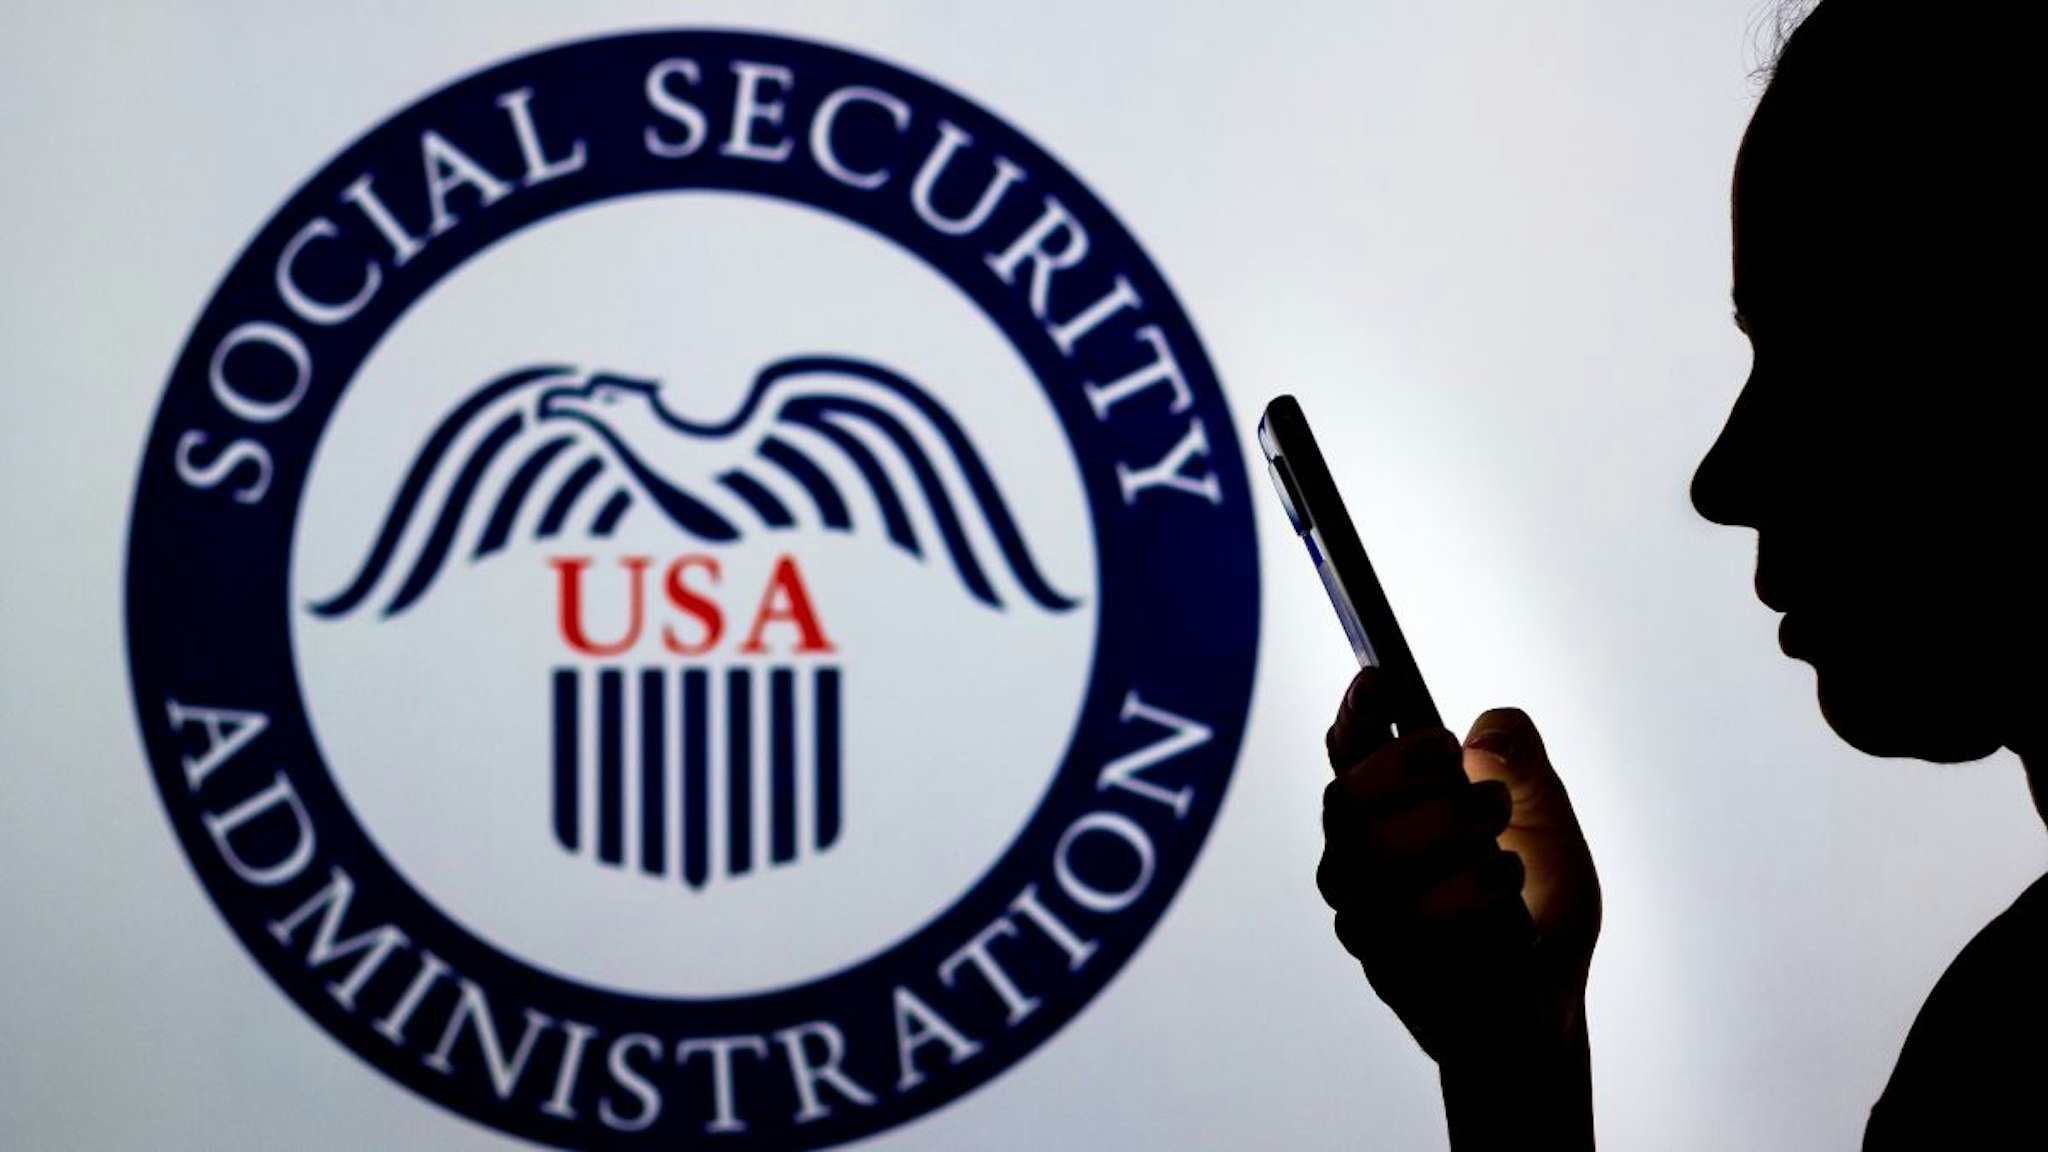 In this photo illustration, a woman's silhouette holds a smartphone with the United States Social Security Administration logo in the background.